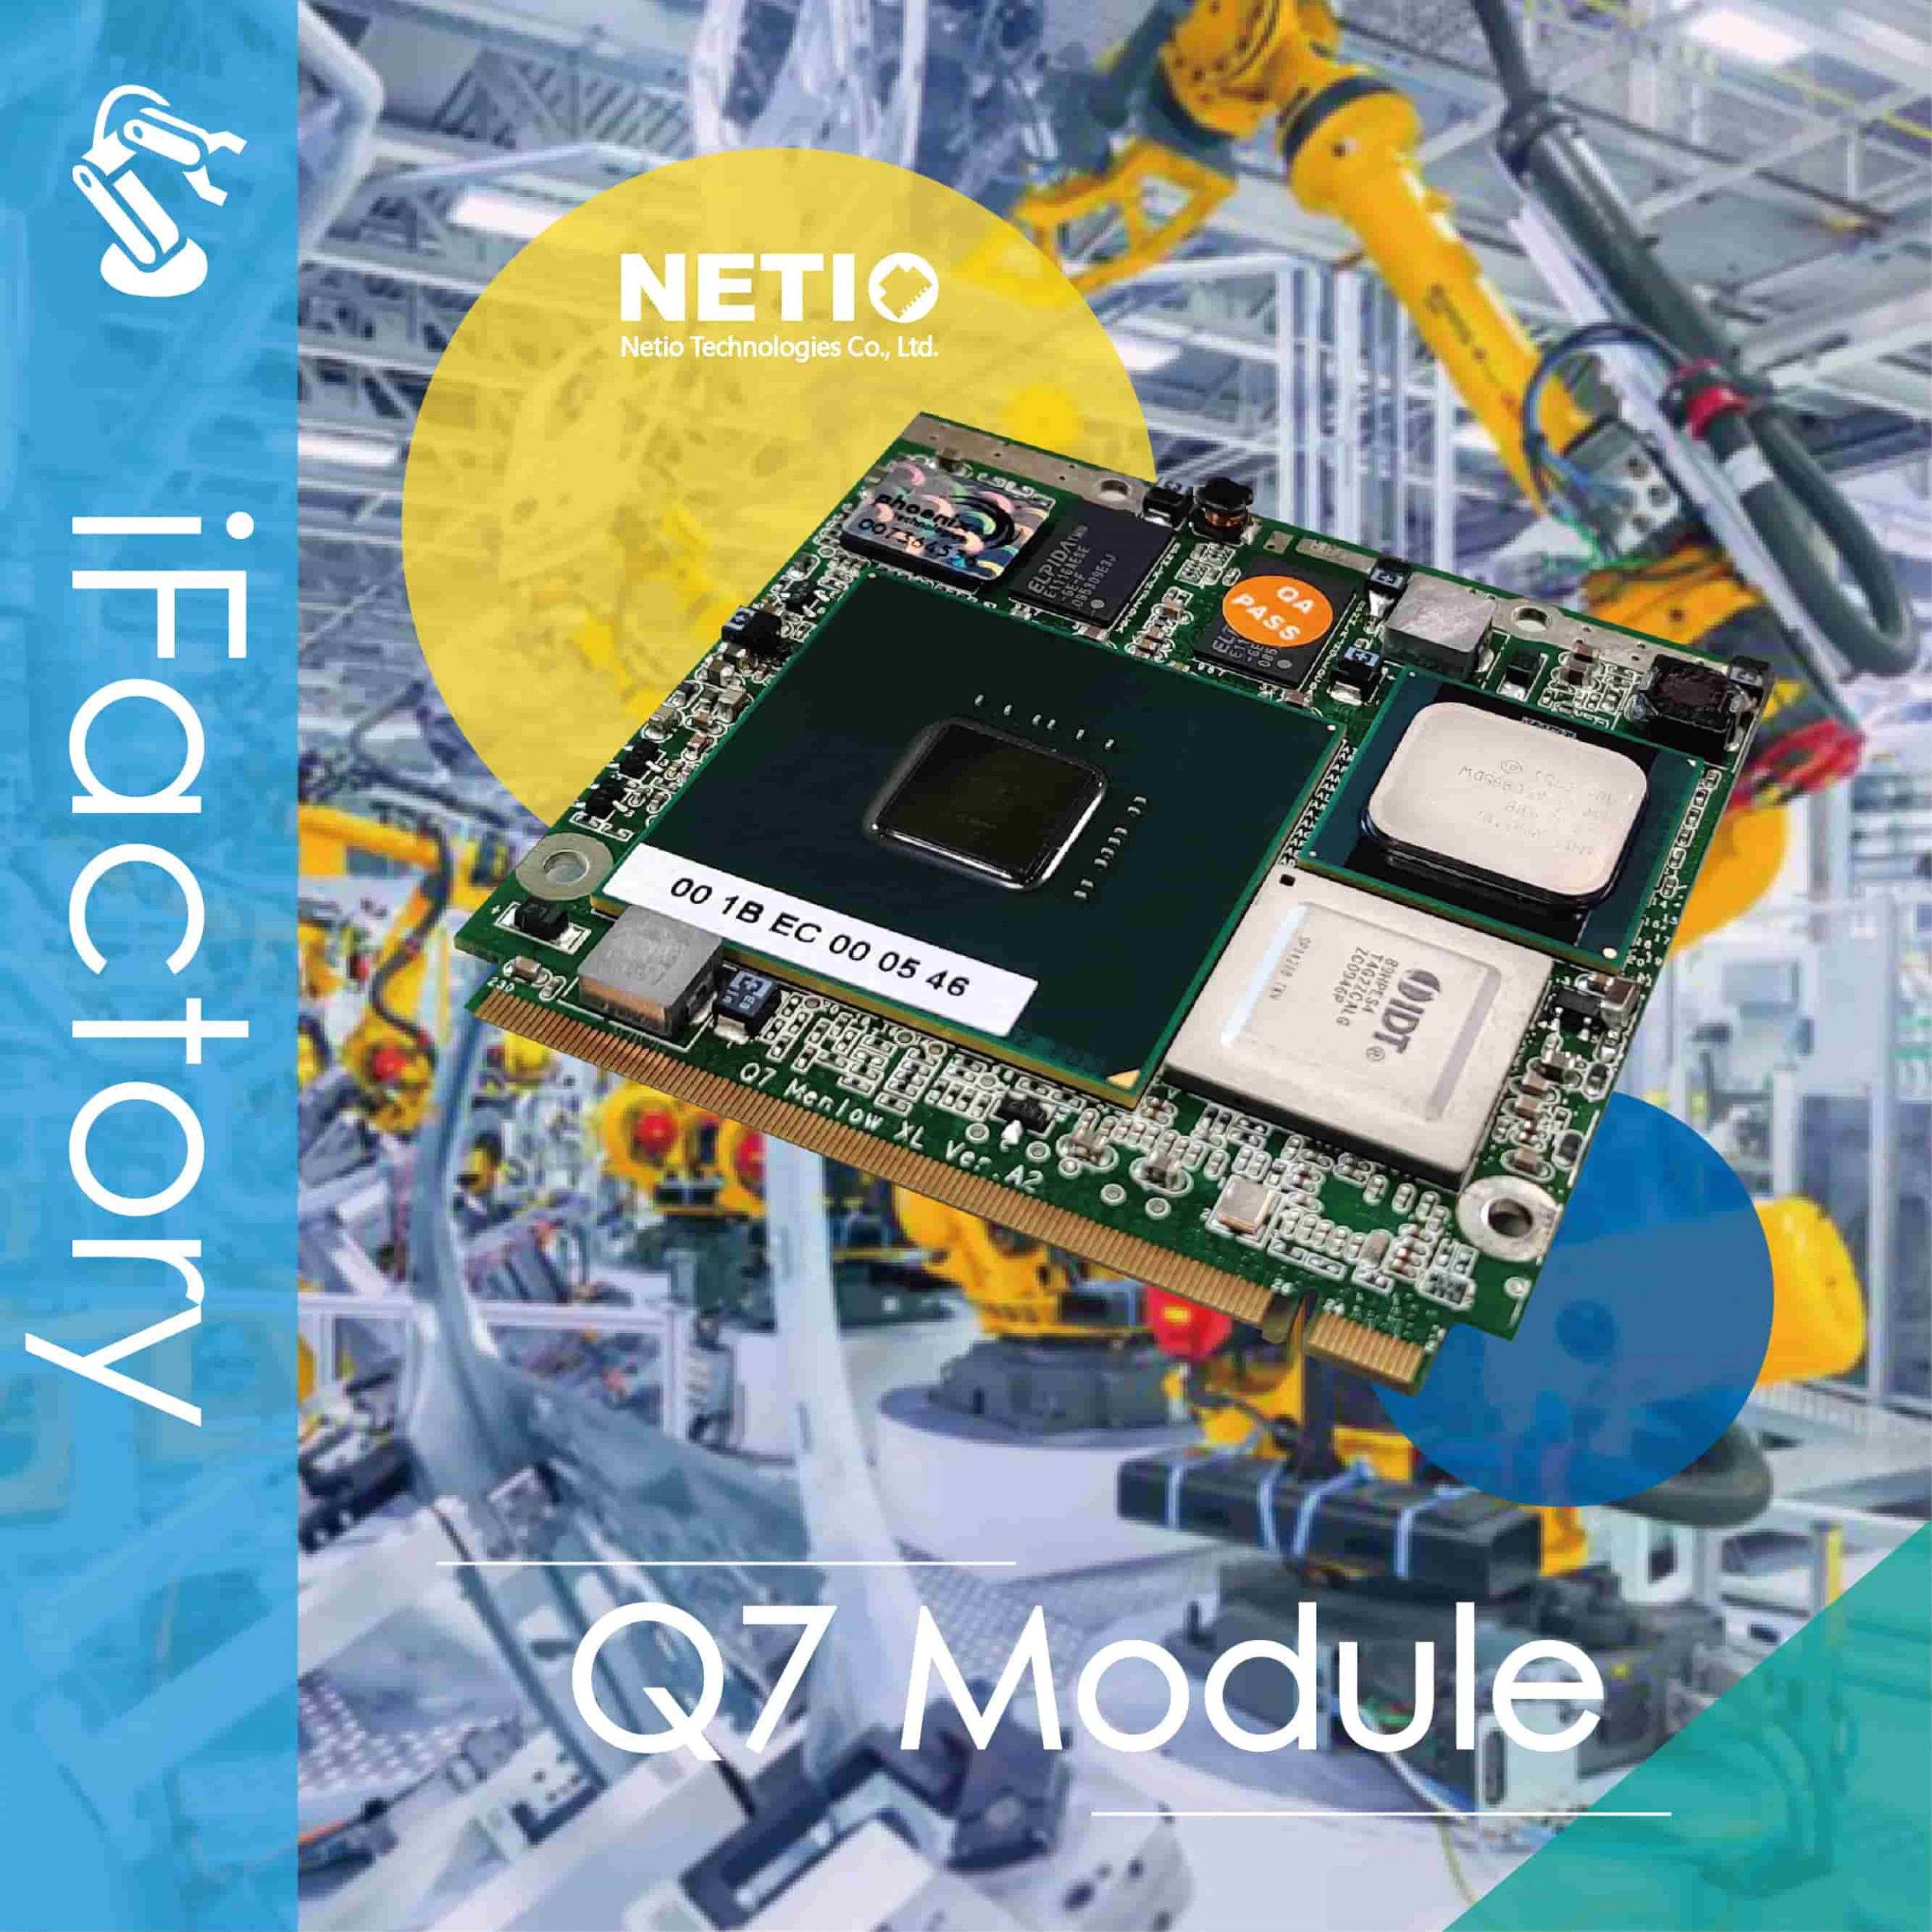 Q7 module (solutions for iFactory)